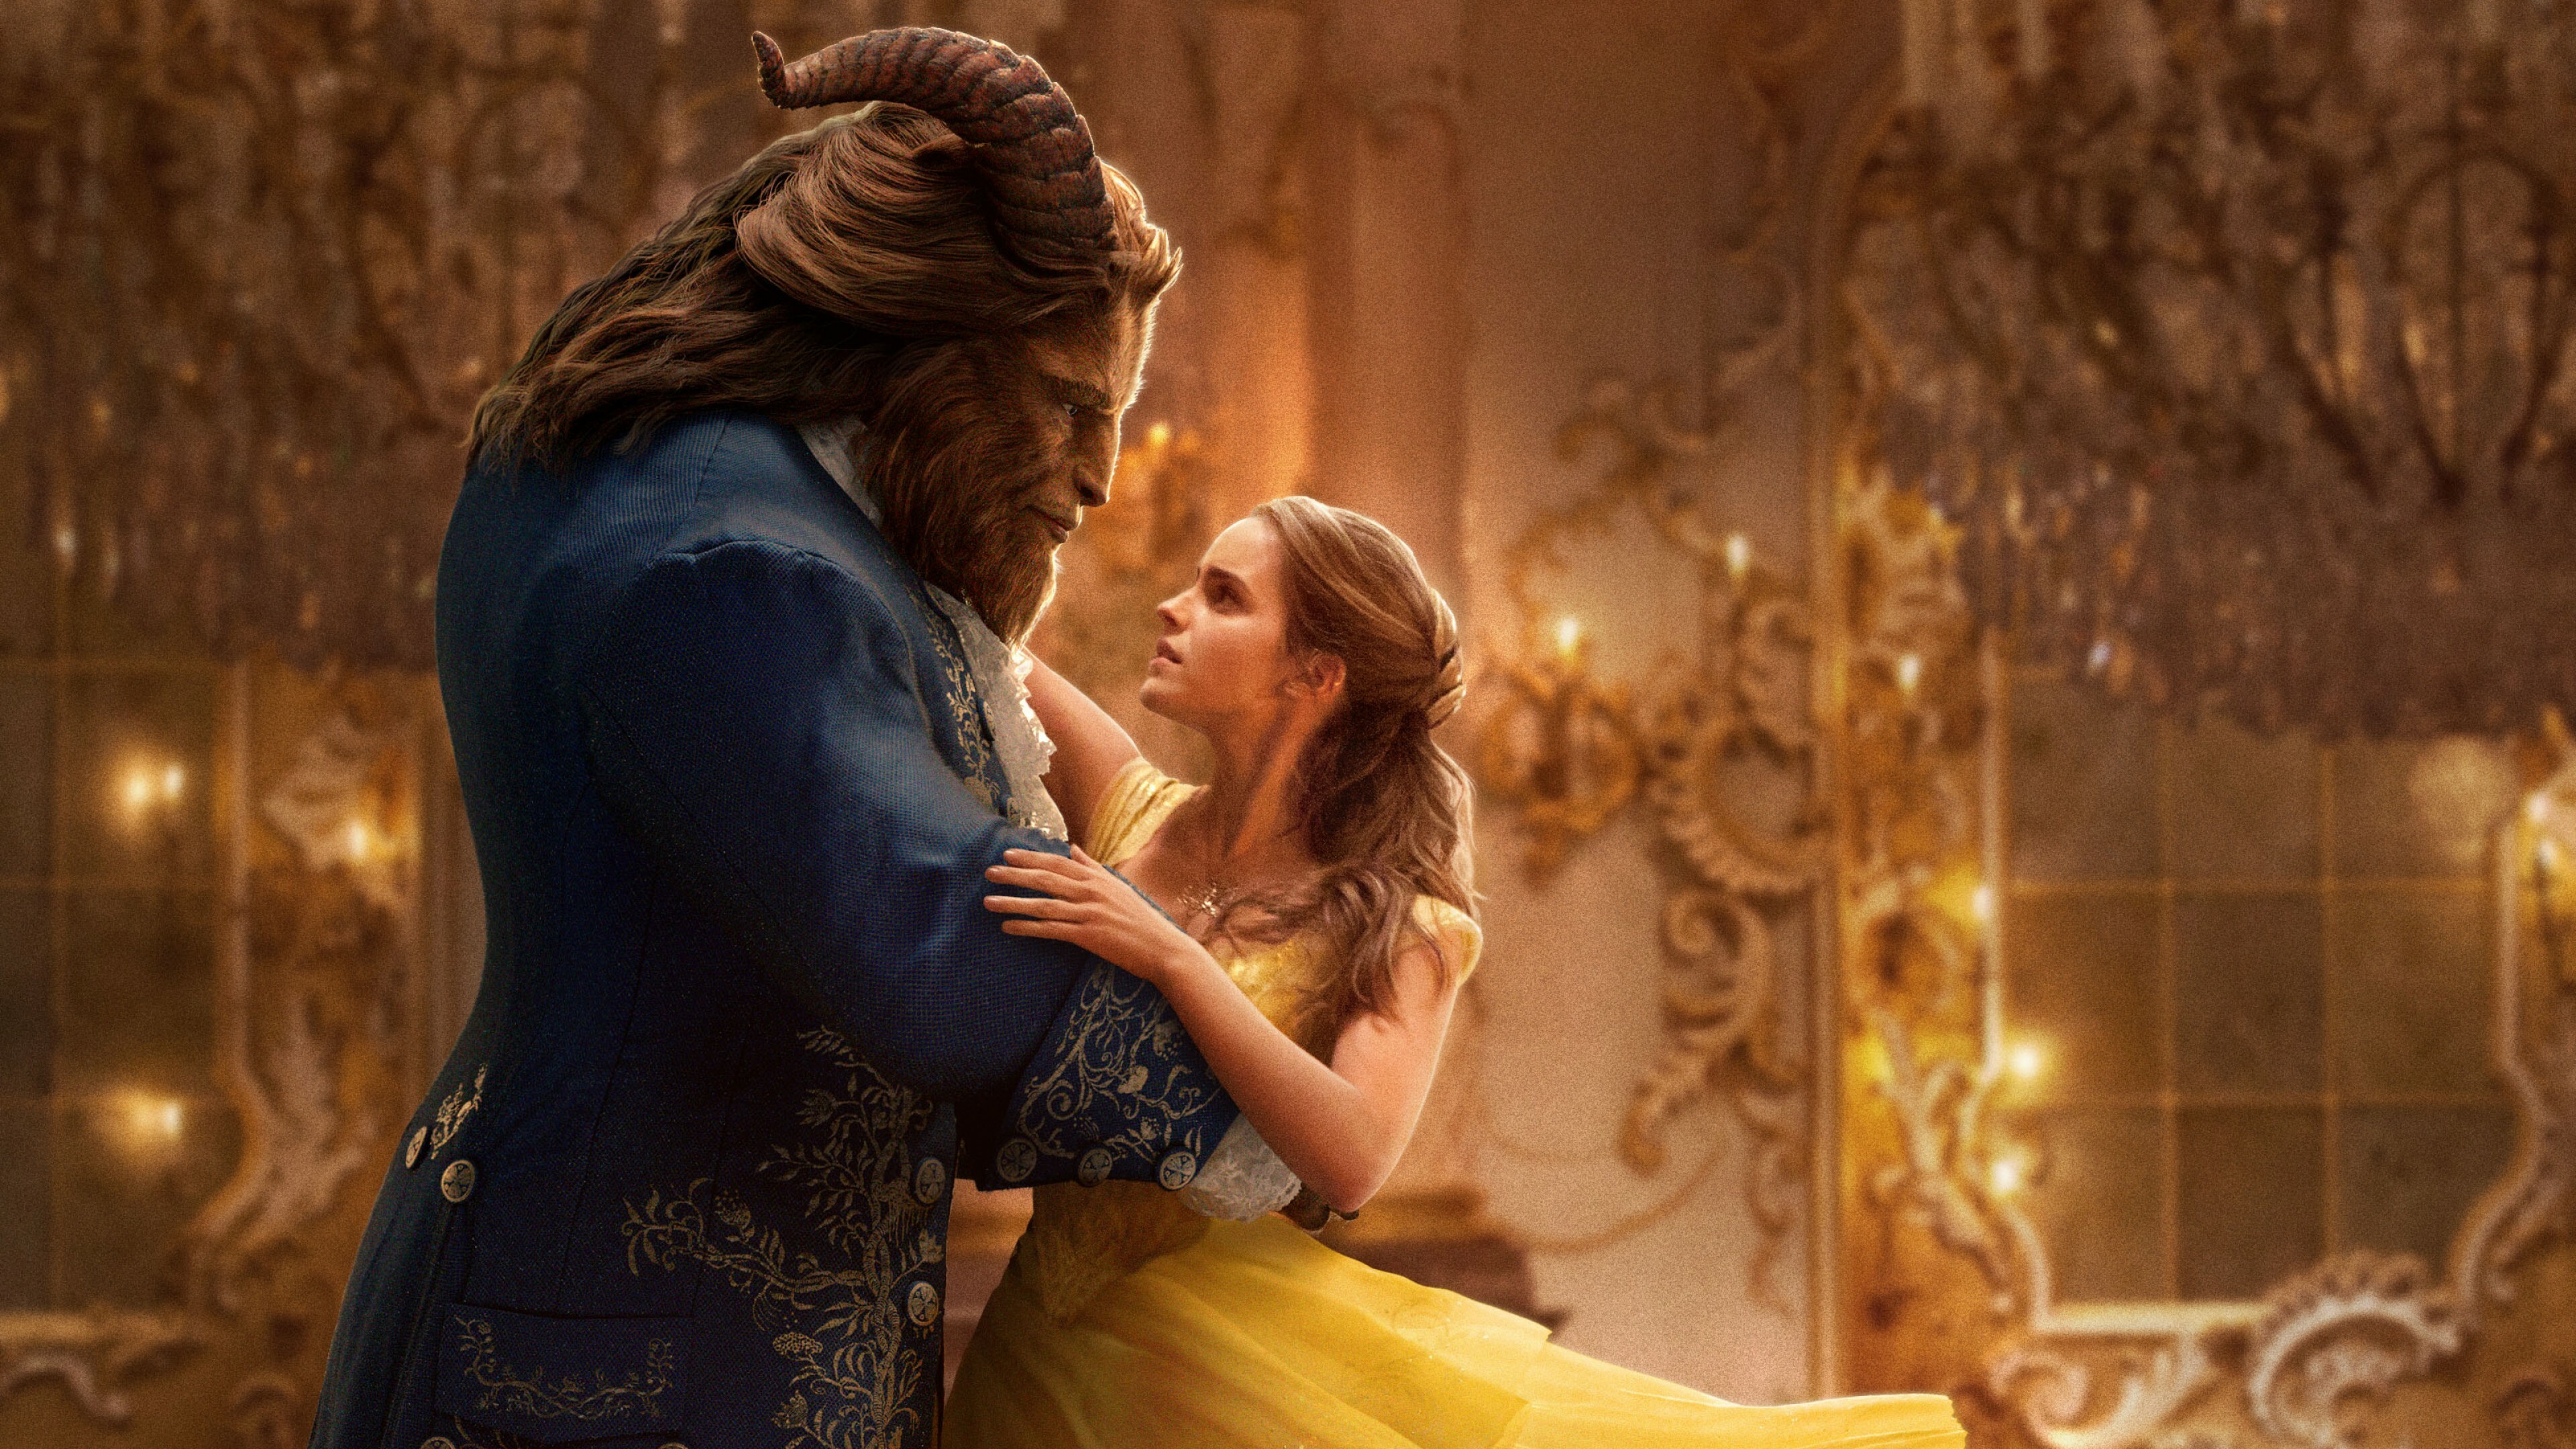 Beauty and the Beast: A 2017 American musical romantic fantasy film directed by Bill Condon, Emma Watson. 3840x2160 4K Wallpaper.